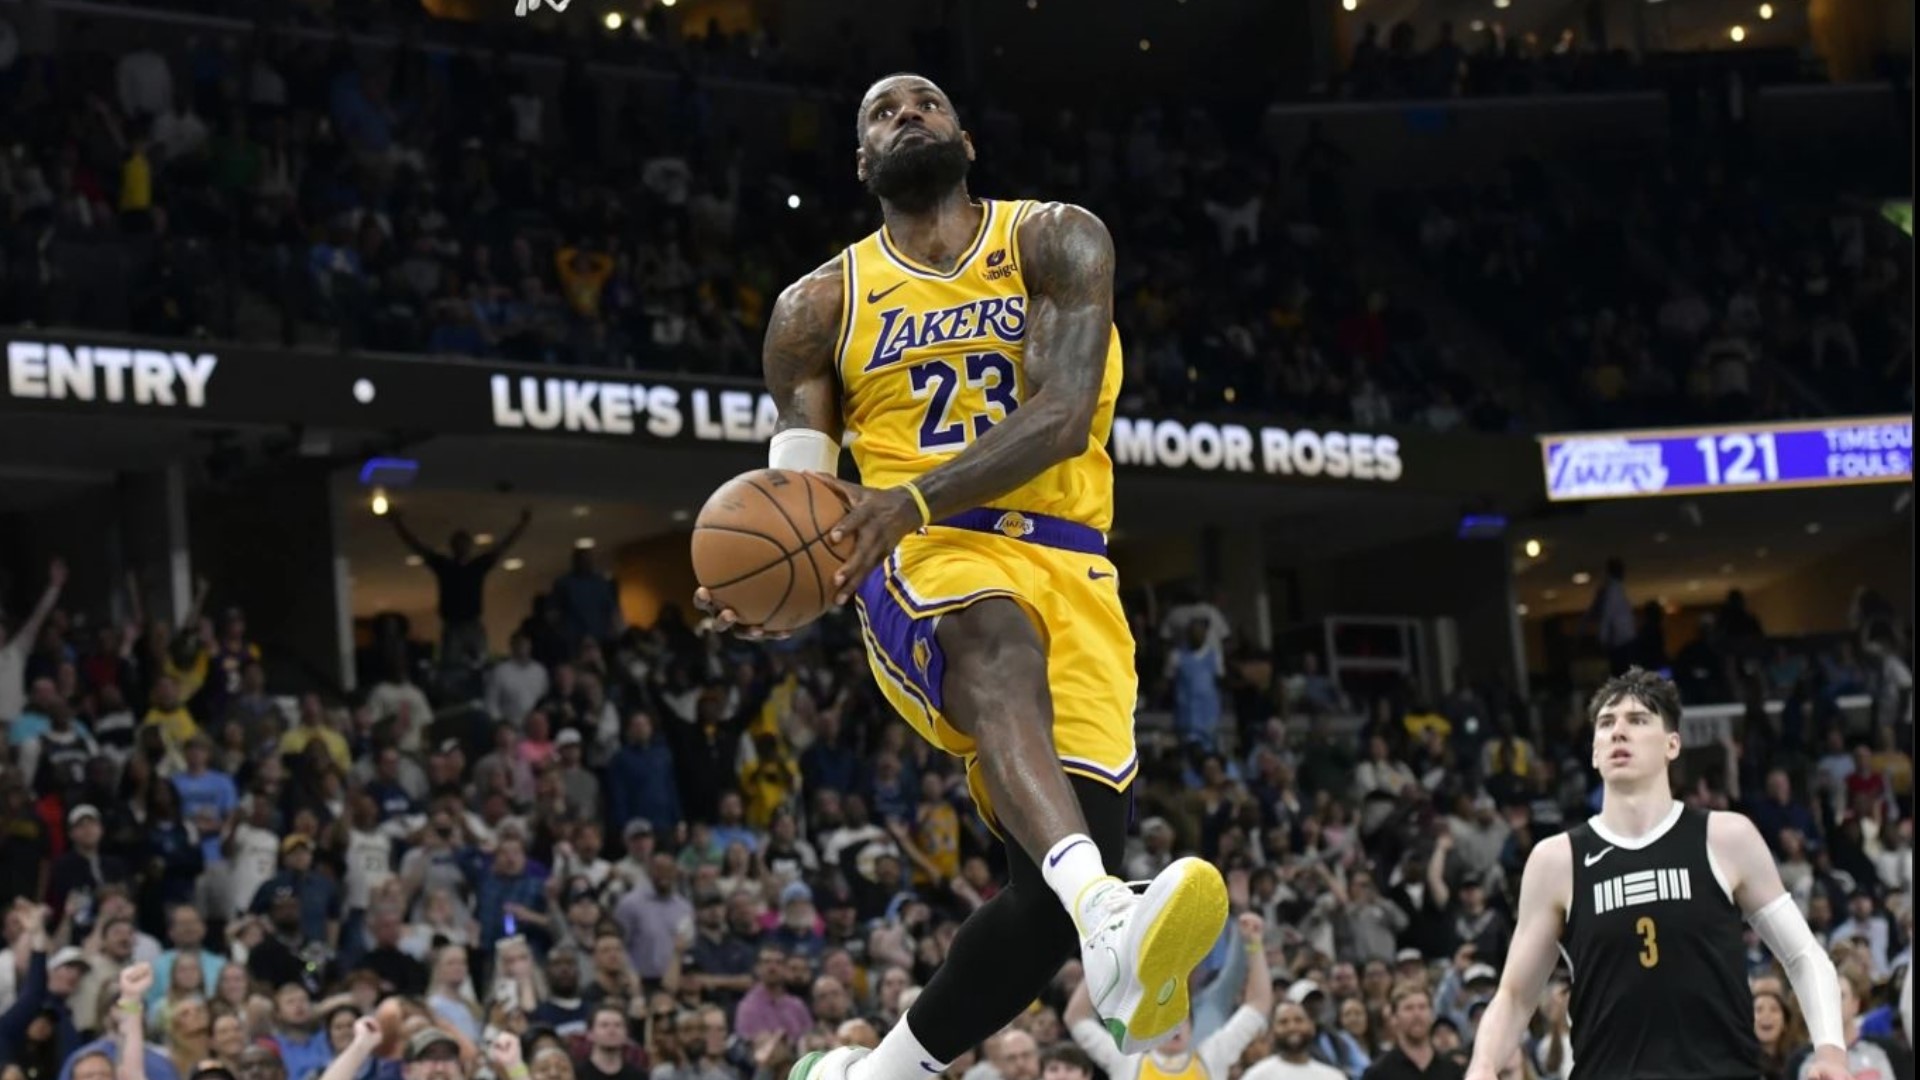 Rachel Phillips breaks down the latest game between the Memphis Grizzlies and Los Angeles Lakers.